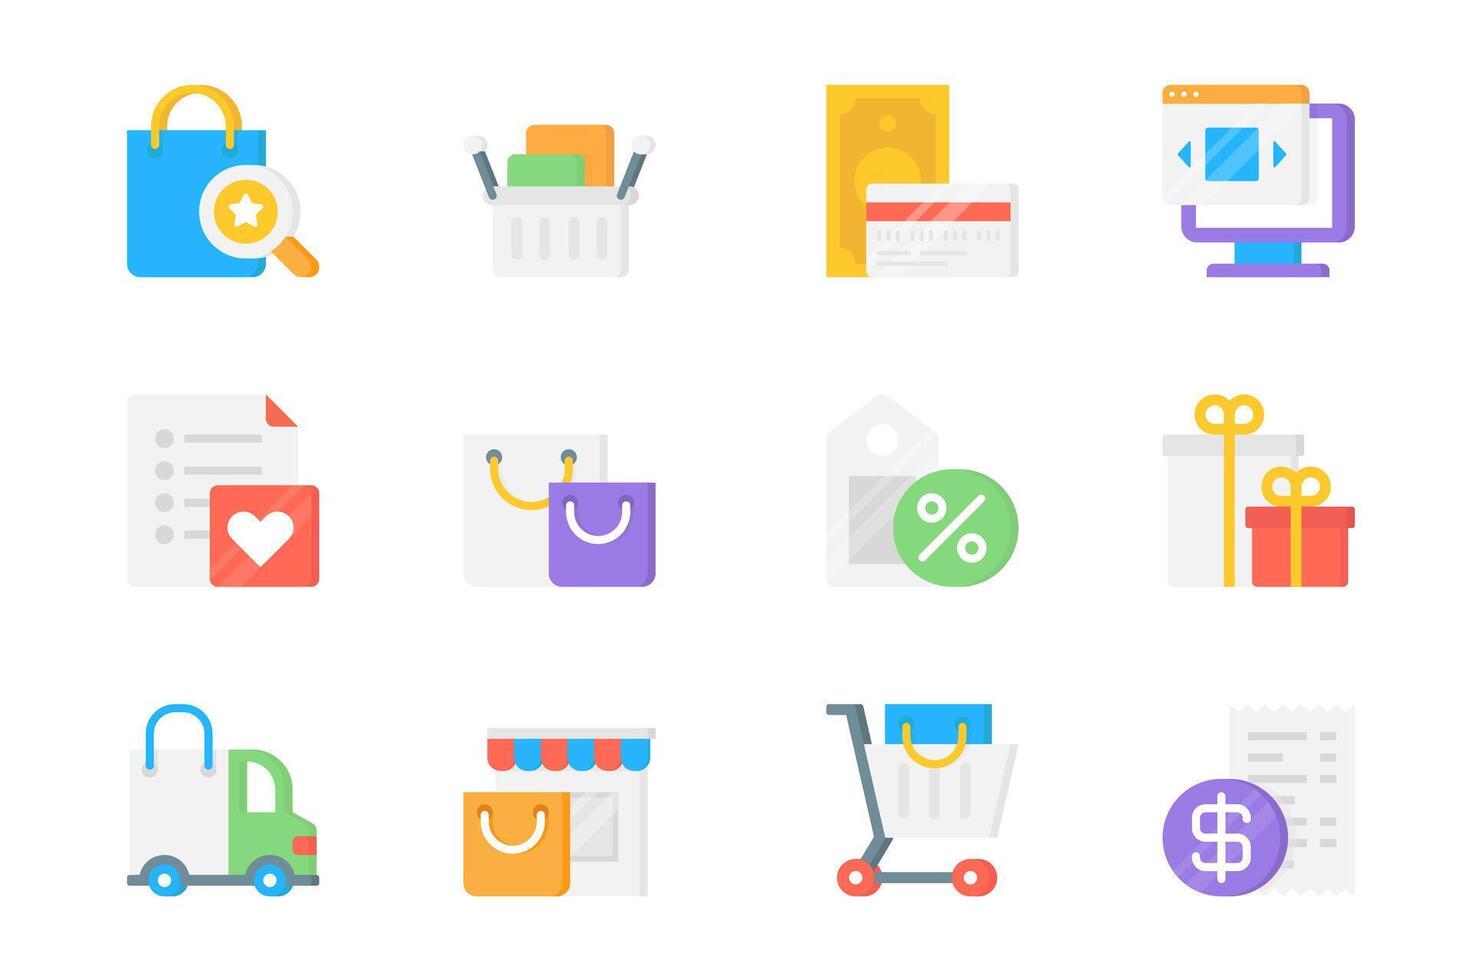 Shopping 3d icons set. Pack flat pictograms of bag, cart, credit card, money, payment, online, wishlist, discount price, gift, loyalty program and other. Vector elements for mobile app and web design